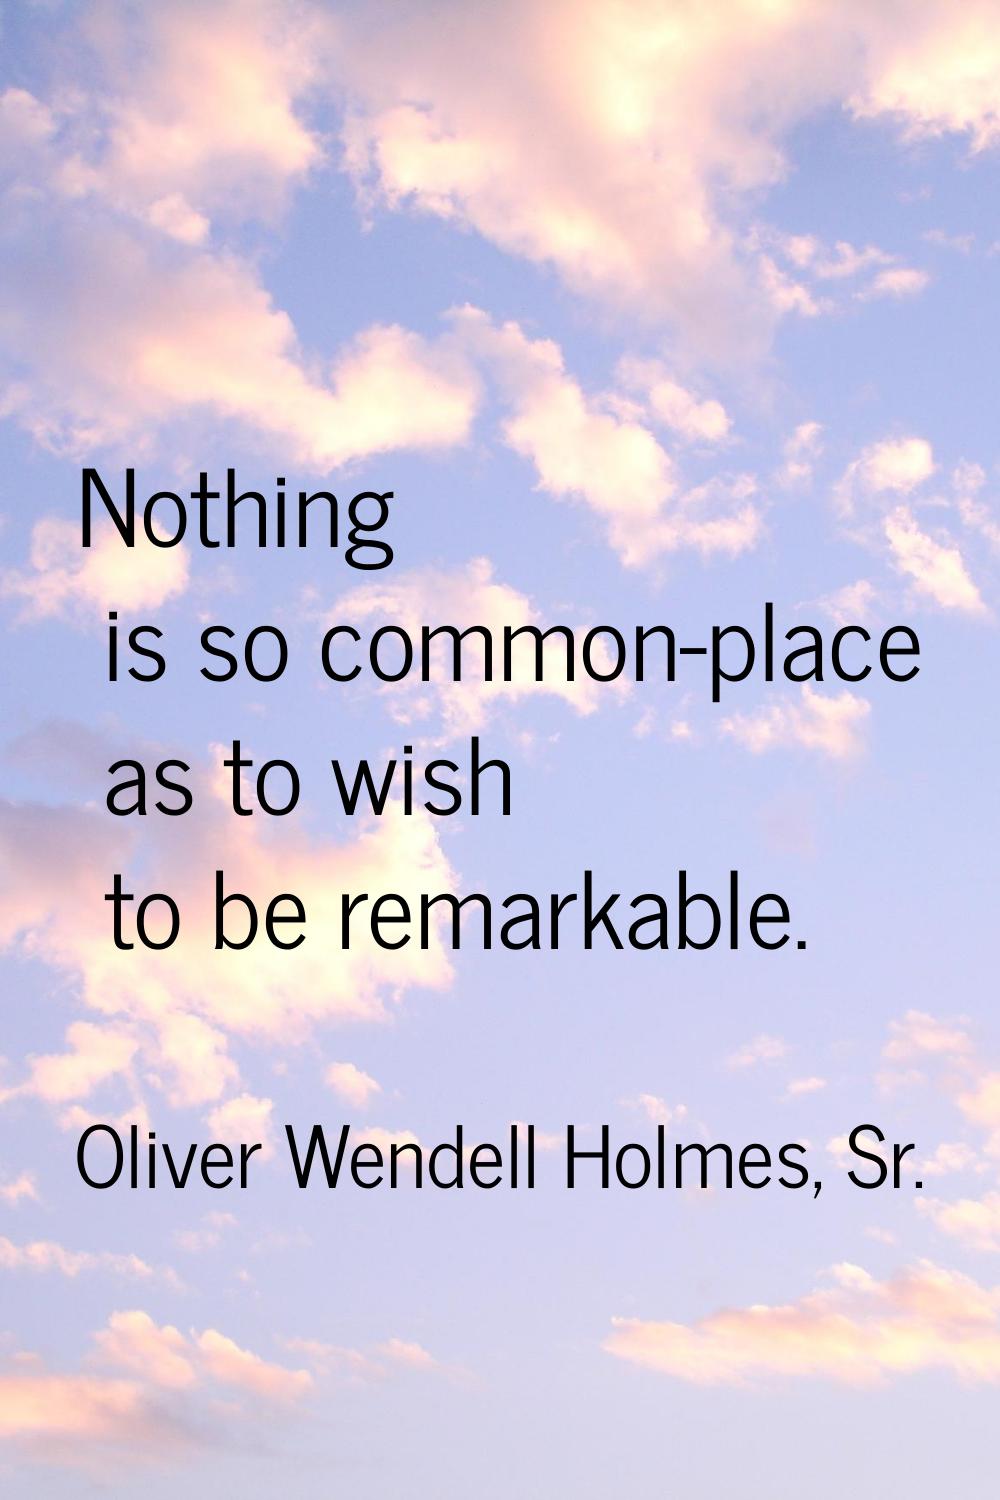 Nothing is so common-place as to wish to be remarkable.